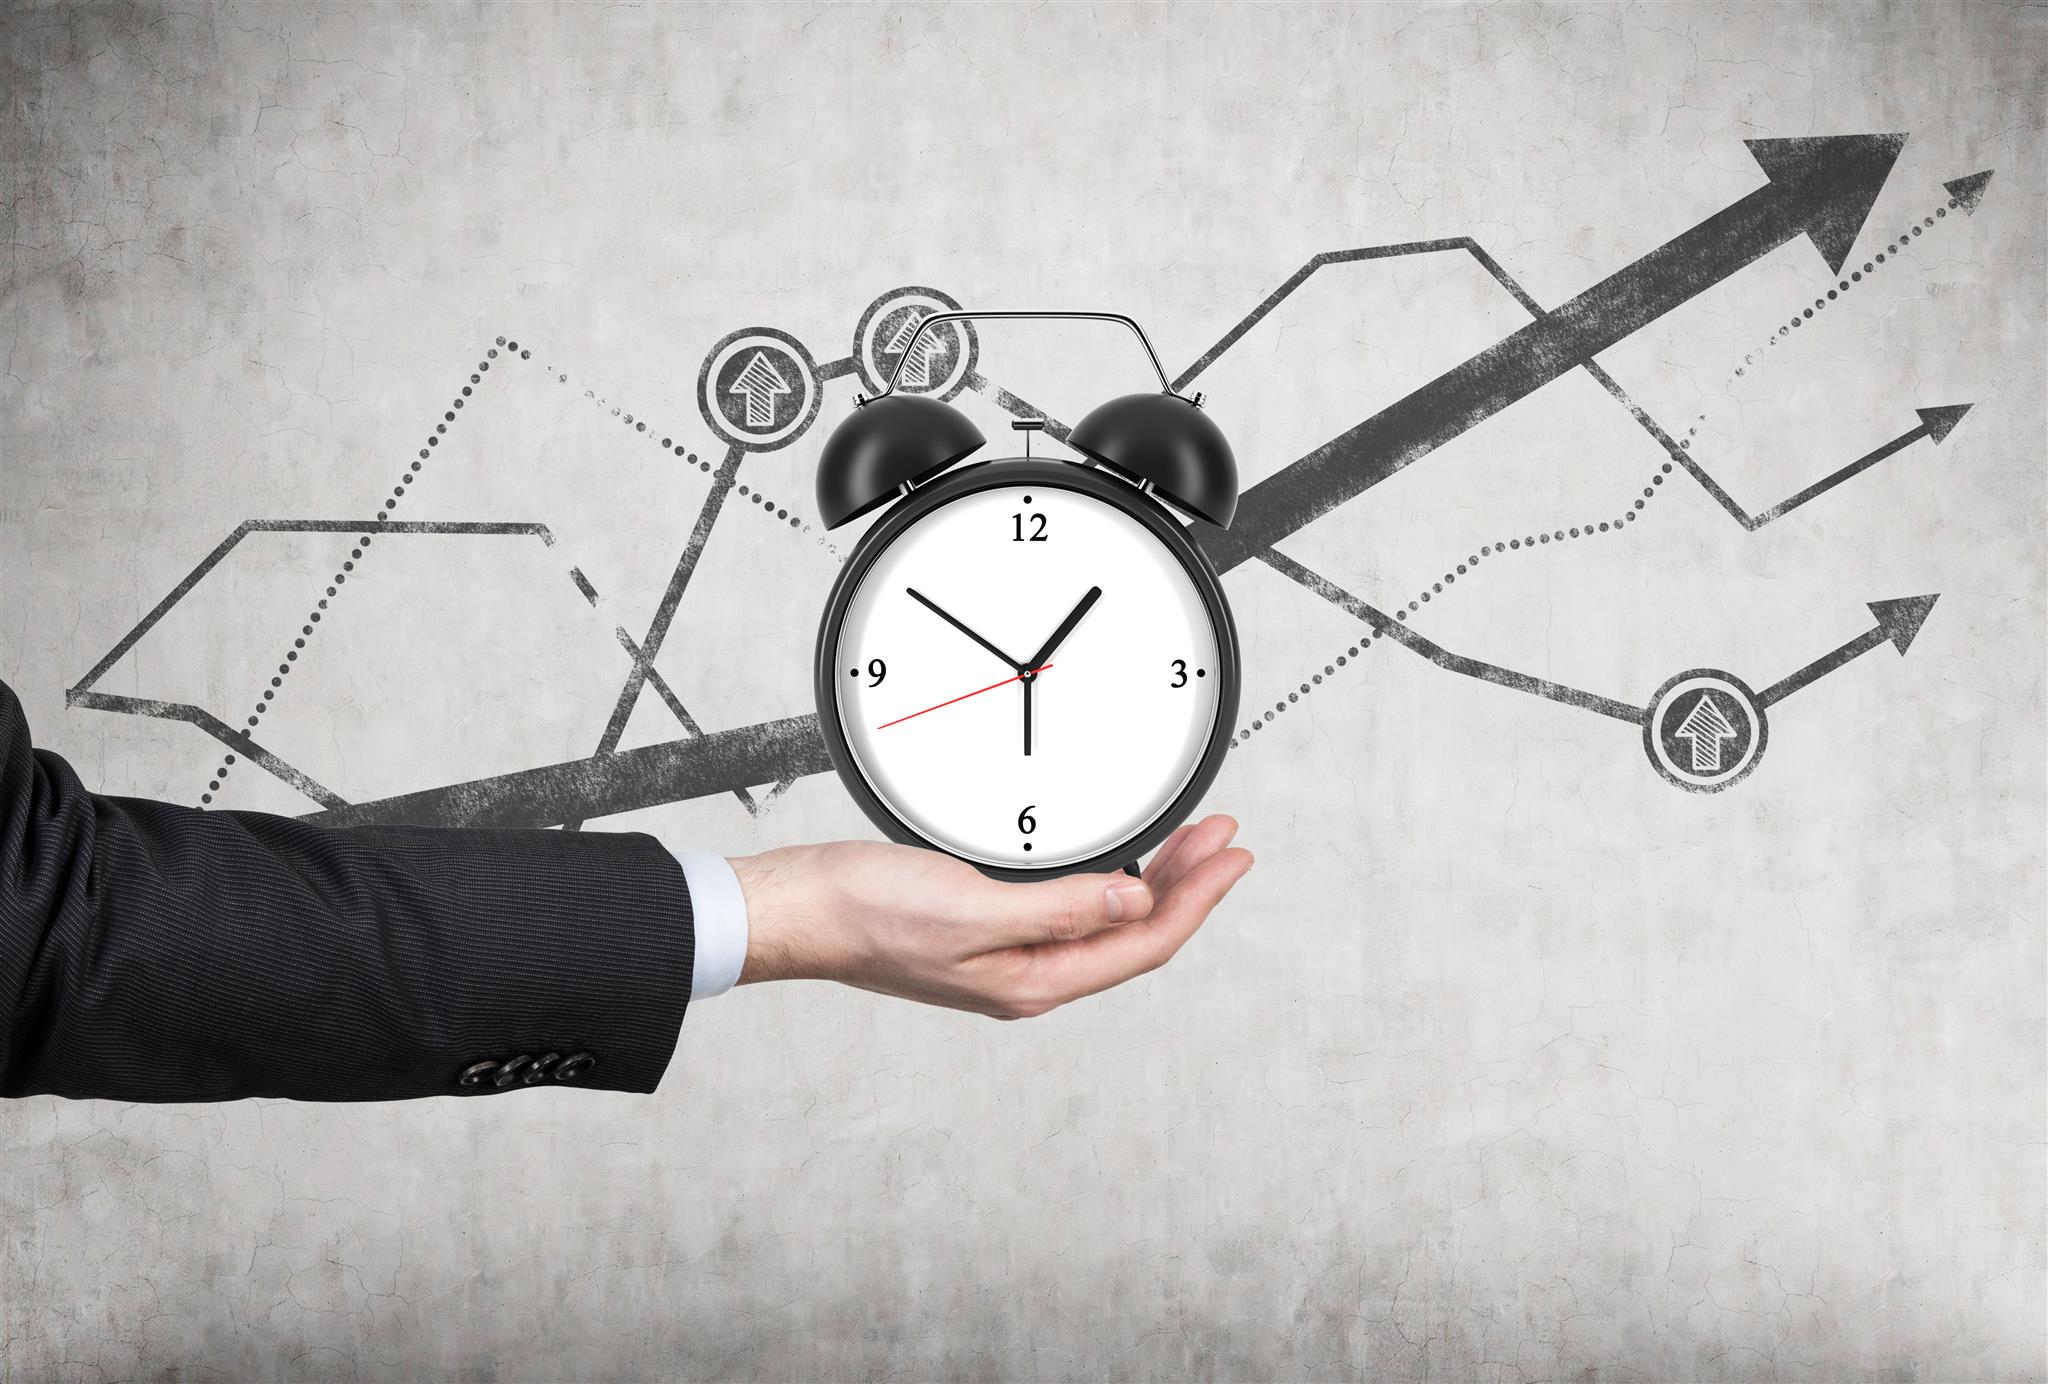 Benefits of the Time Tracking Software